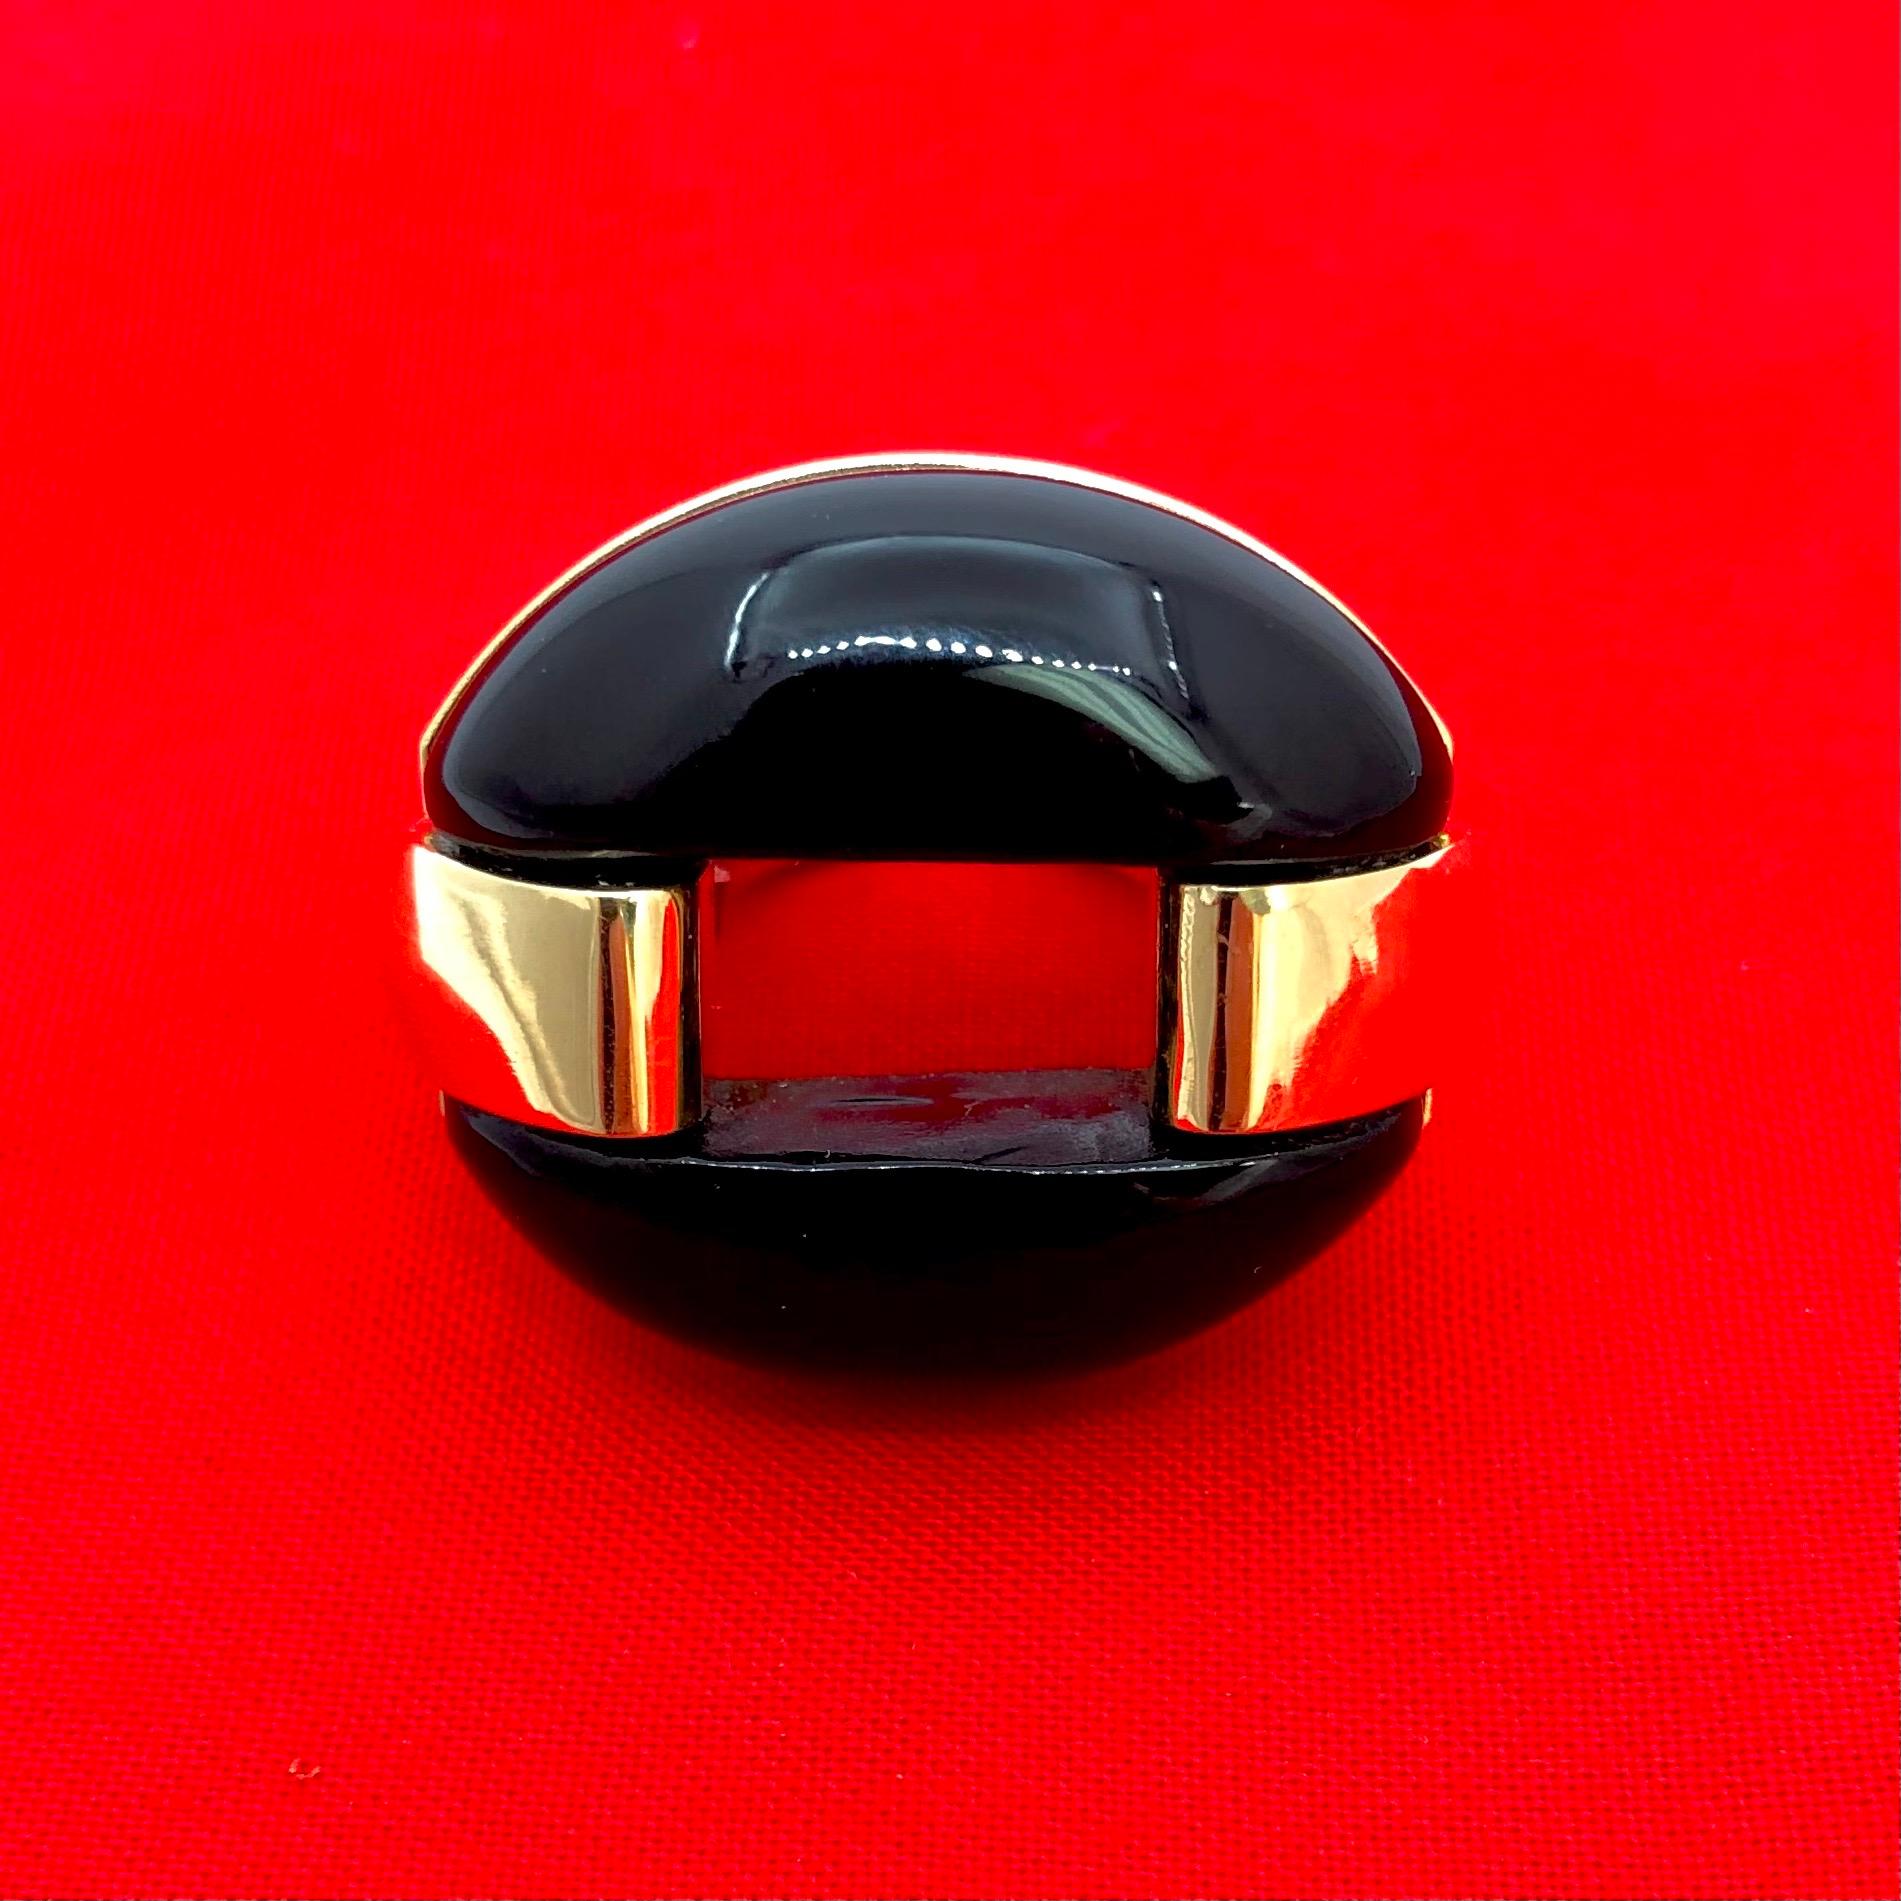 This striking and impactful ring is crafted from 18k yellow gold atop which sits a custom cut, black onyx oval measuring 1 3/16 inches by 1 1/16 inches. The stylish ring shoulders embrace the onyx oval on each side creating a visually stunning